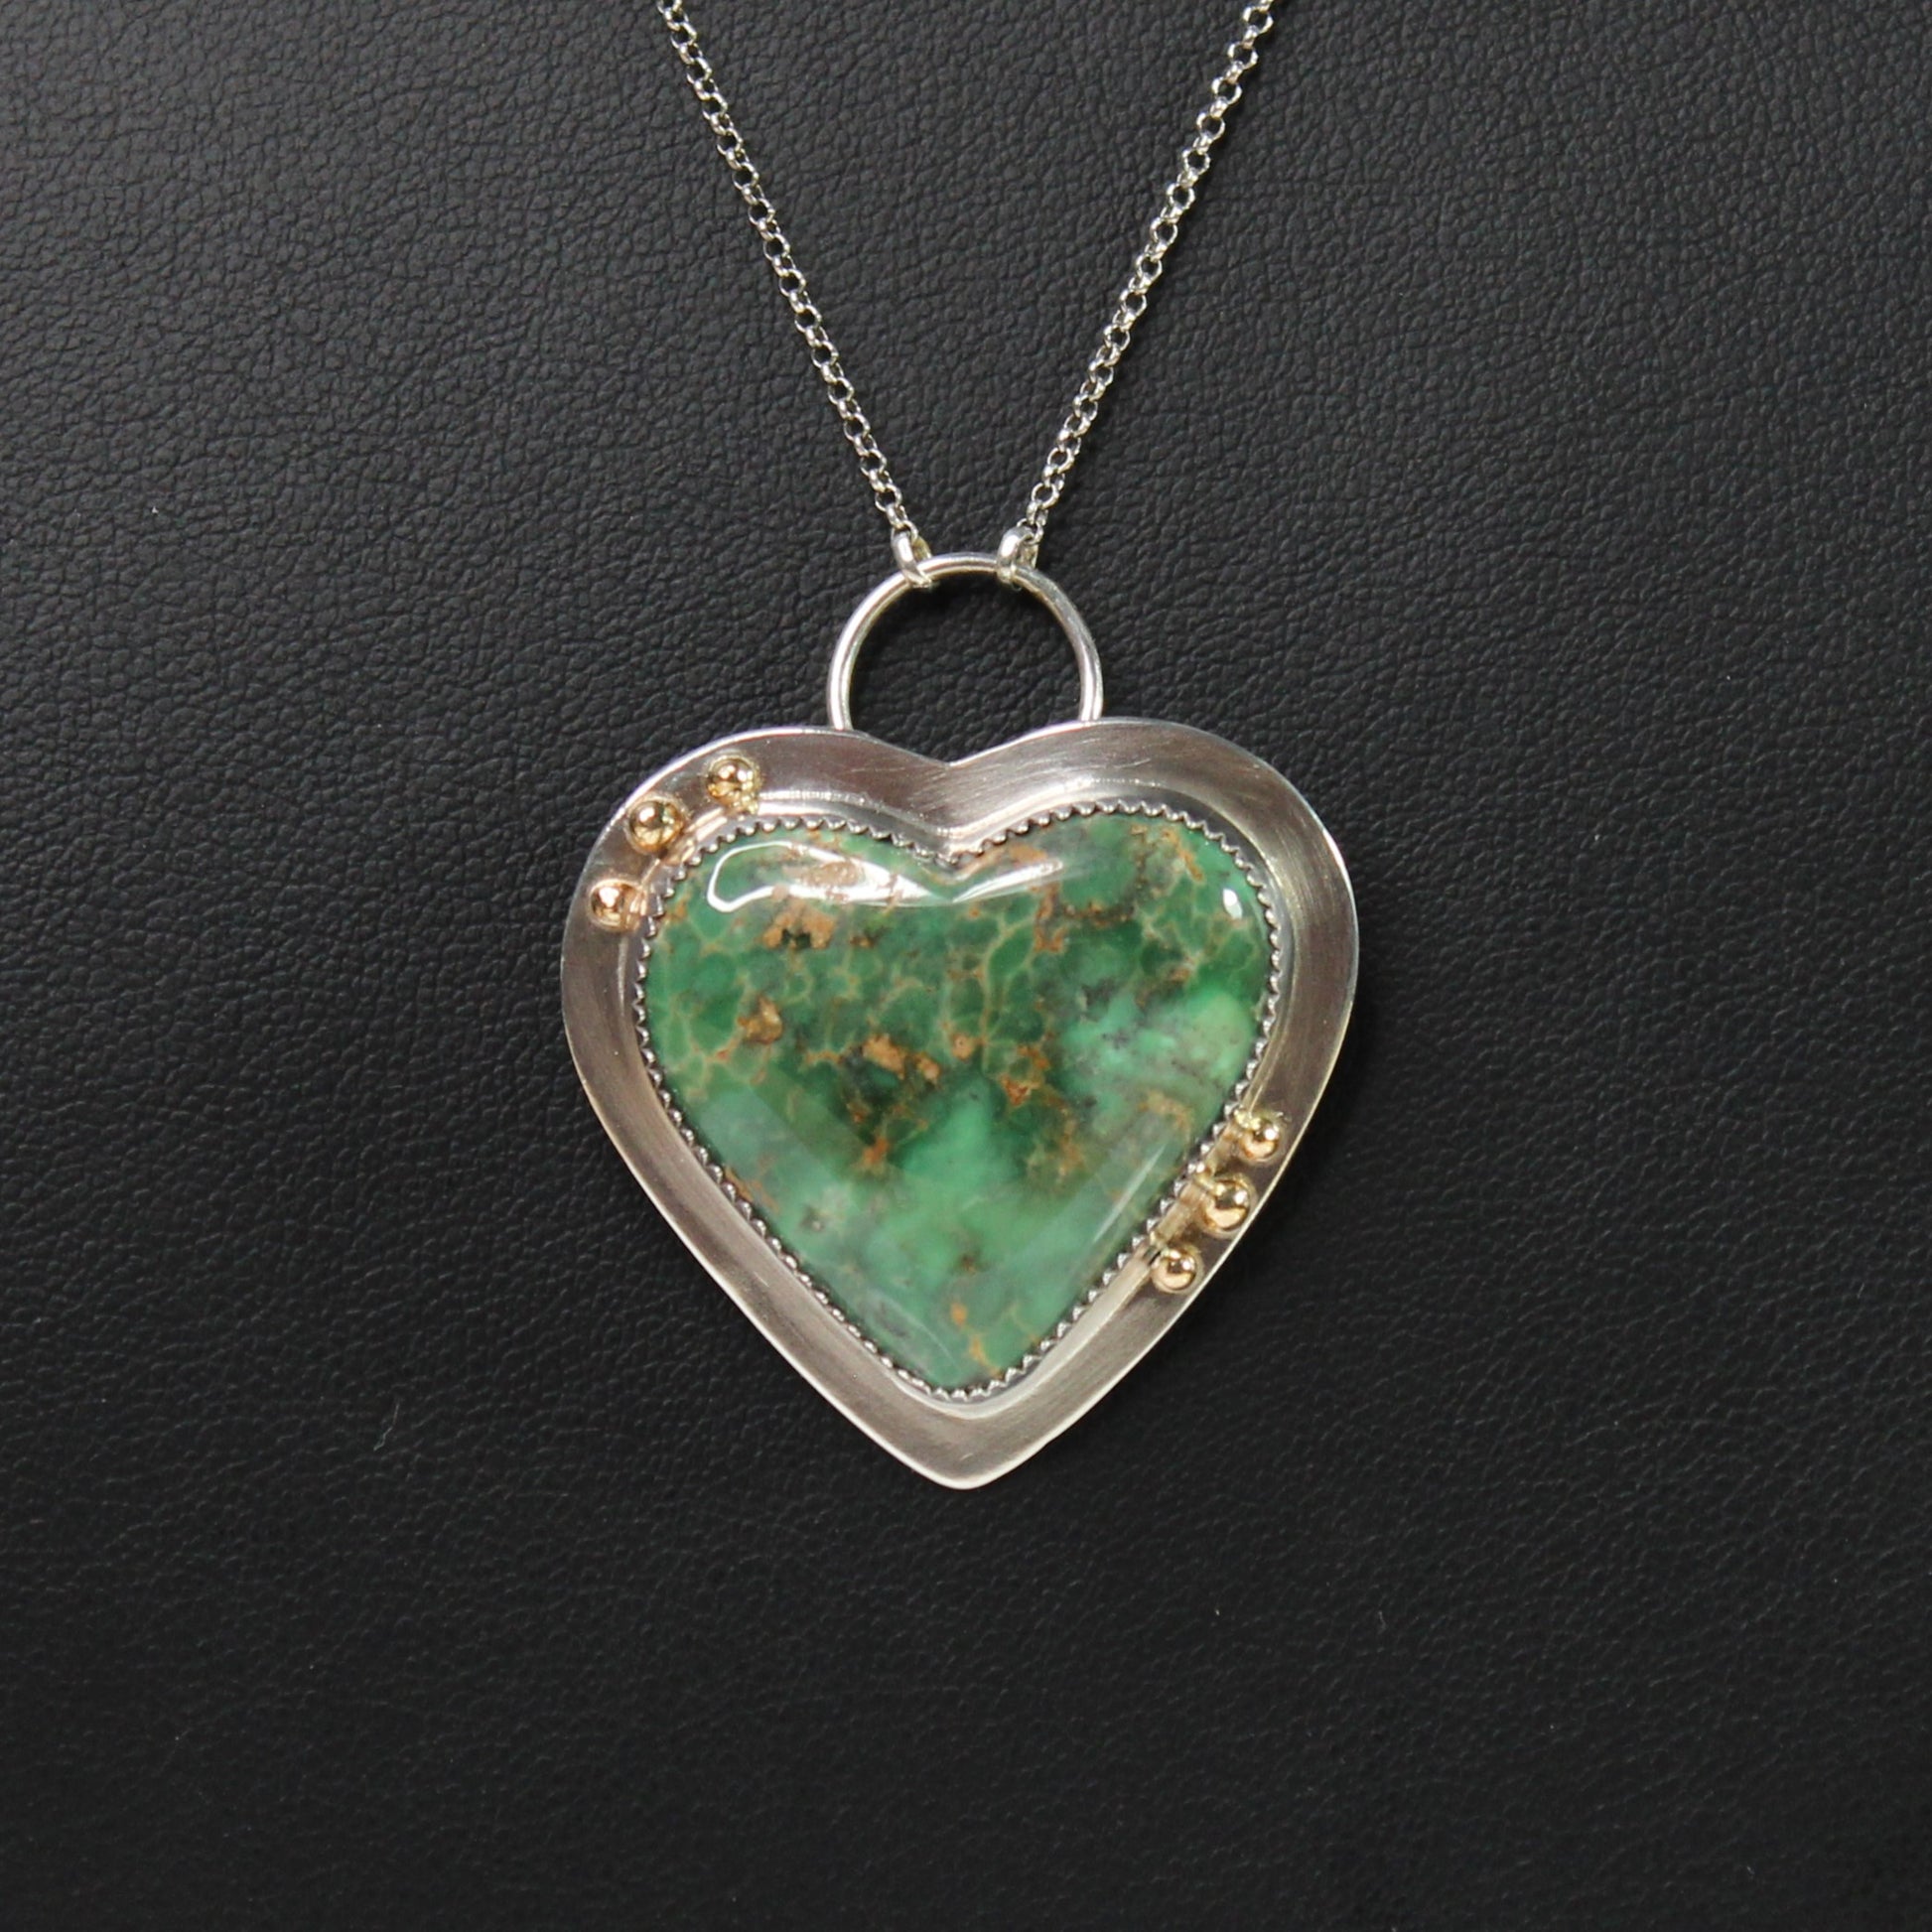 Australian Variscite Green Heart Shaped 16" Handmade Necklace in Sterling Silver and 18k Gold Beads